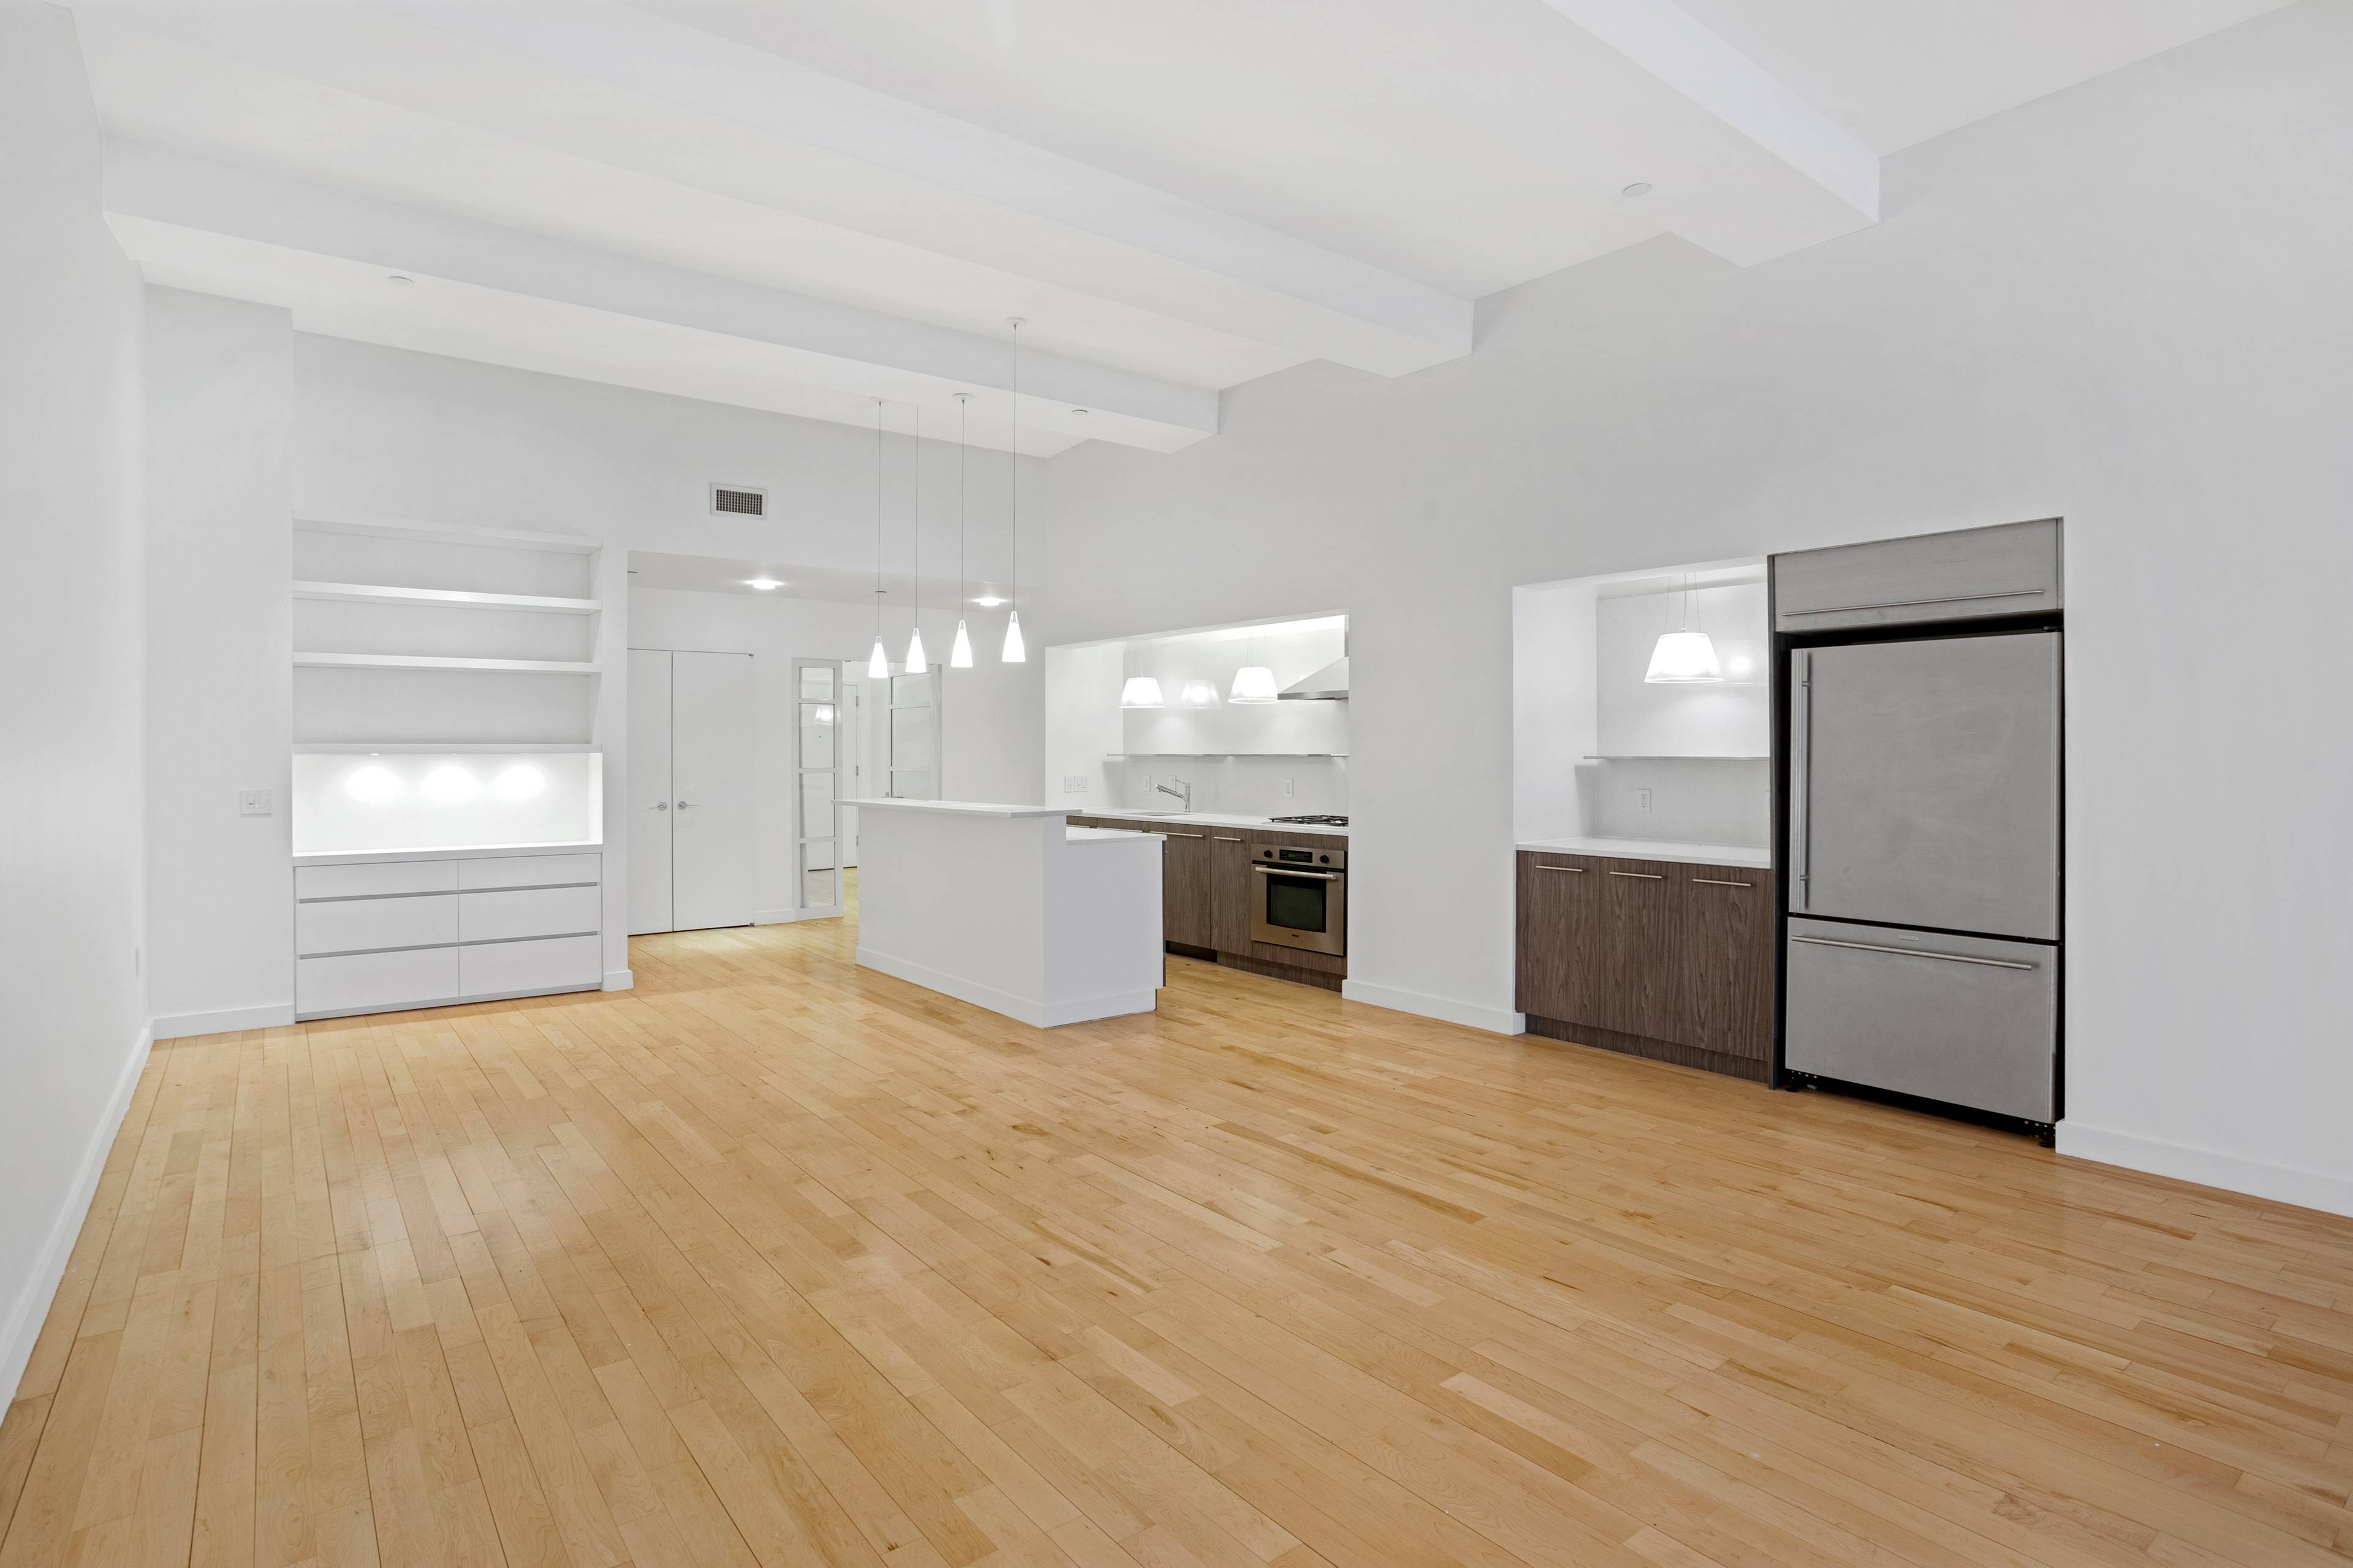 Upon entering unit 916 at the former home of the JP Morgan headquarters at 15 Broad Street, you'll be awed by the wide open loft, maple hardwood floors and oversized ...